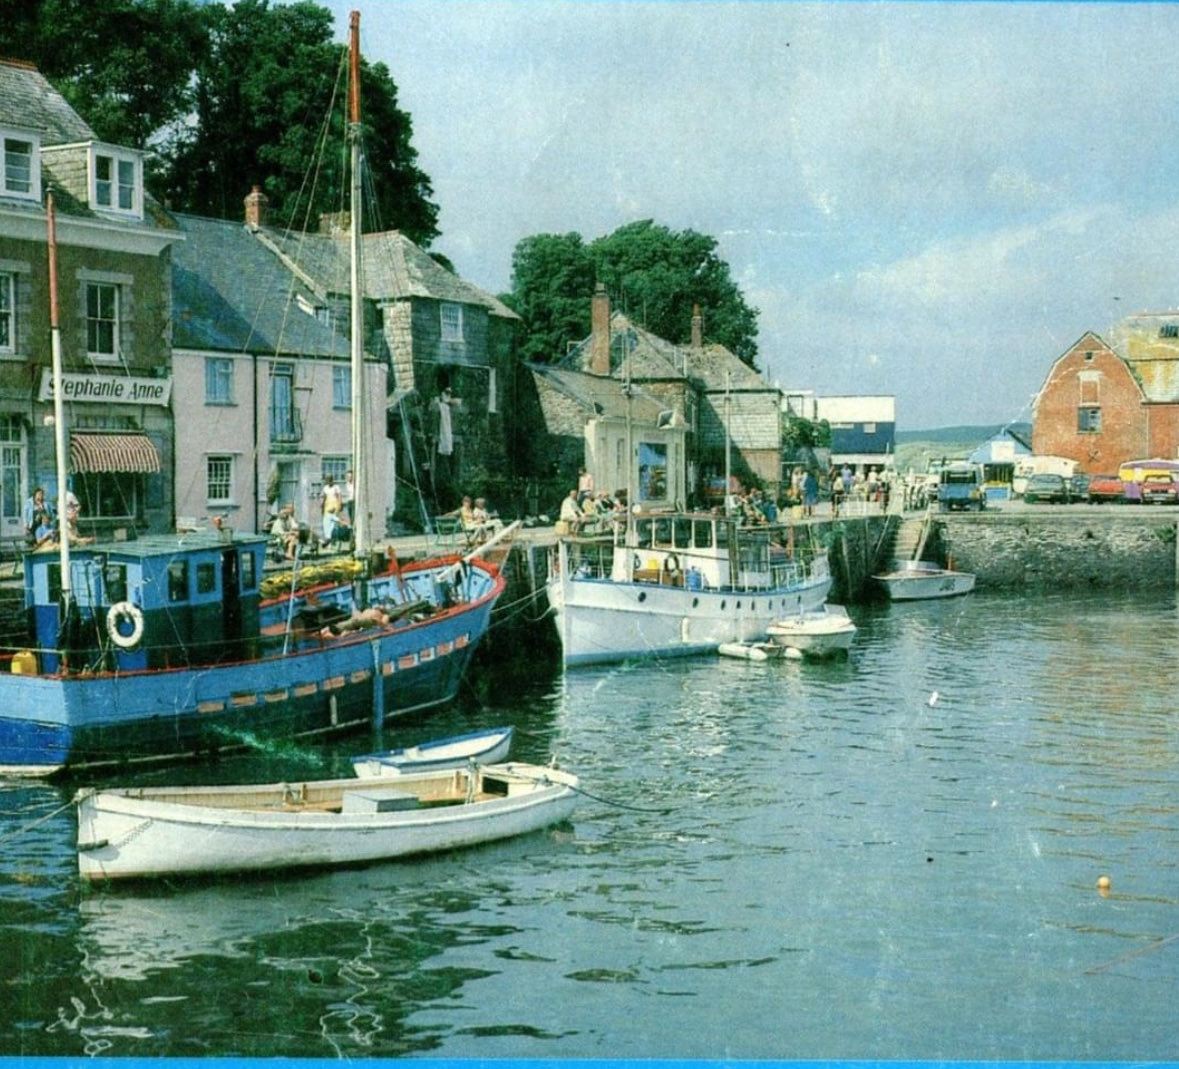 Great picture here of the harbour with the original Jaws speedboat waiting for customers #padstow#harbour#bestplace